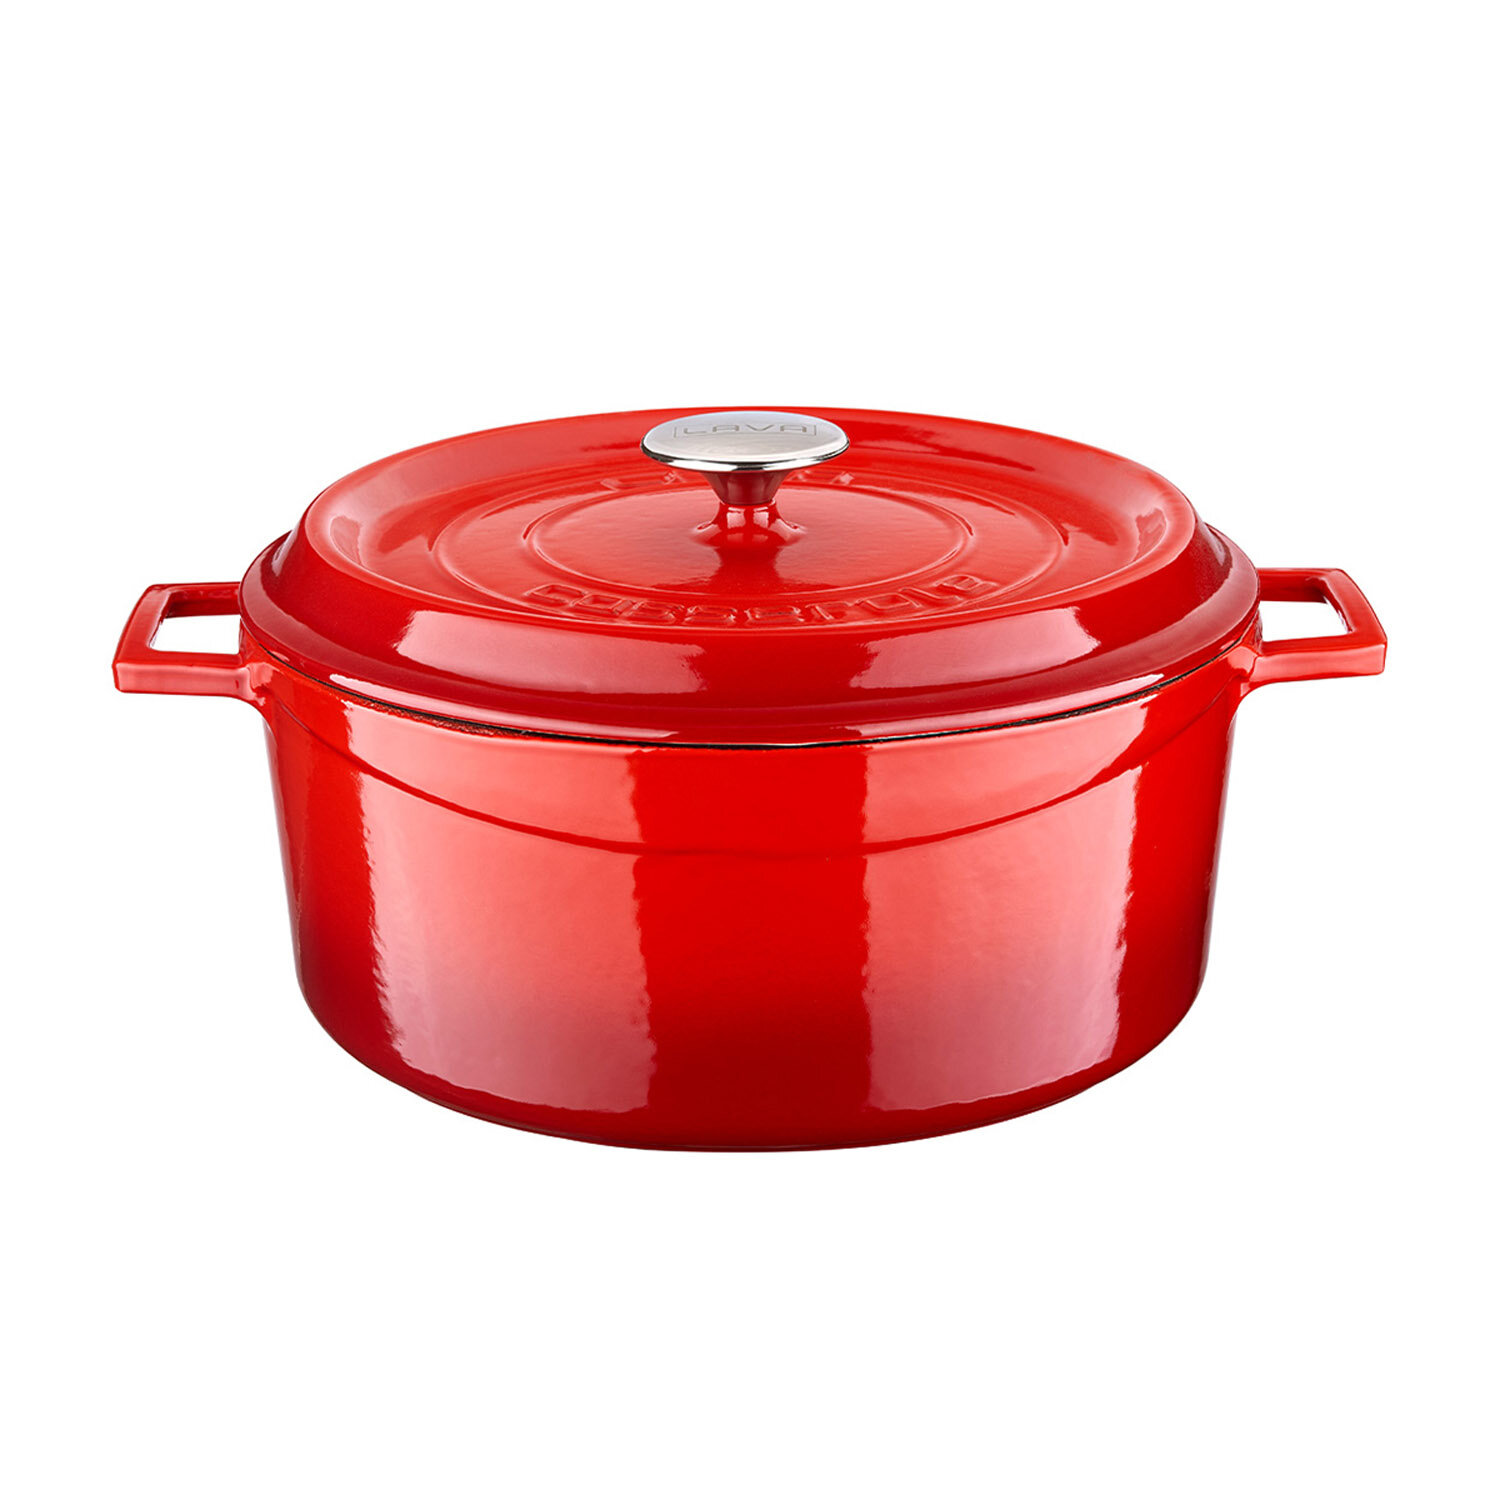 7-Quart Enameled Cast Iron Round Dutch Oven with Lid | Premium Cooking Pot  | Enamel Coating Inside and Out | Wide handles and large stainless steel